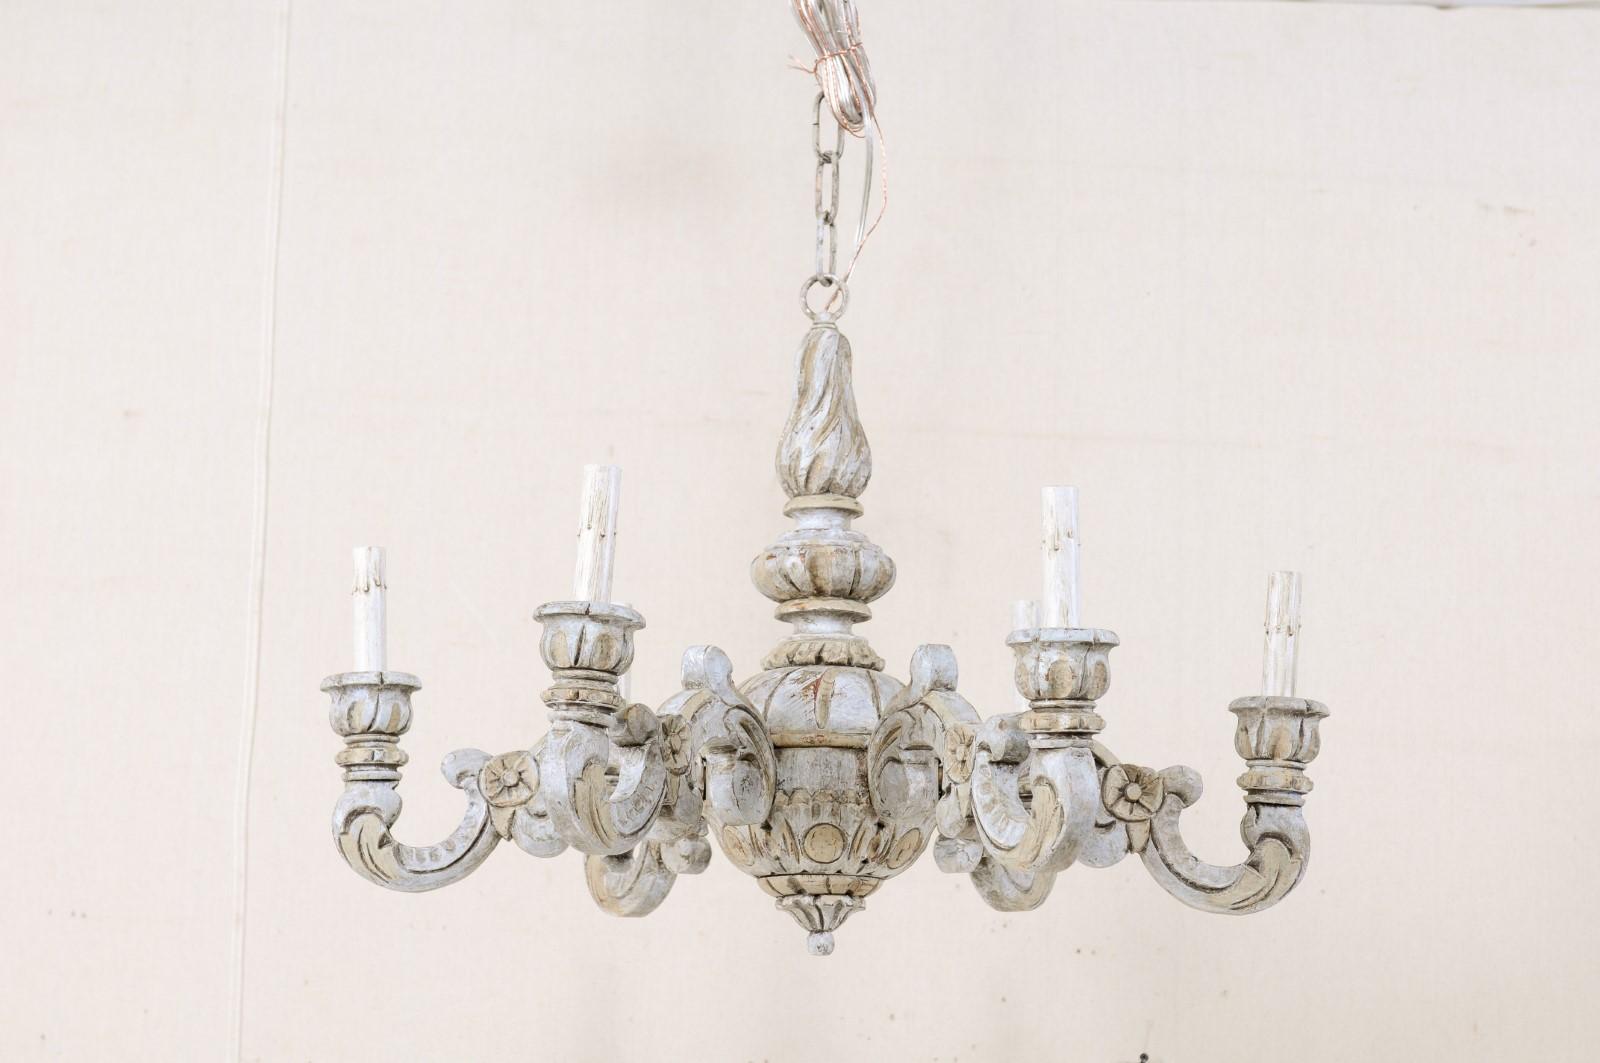 A French mid-20th century carved wood six-light chandelier. This lovely vintage chandelier from France features a curvaceous central column, with small medallions, leaf, and fluted motifs, a sphere-shaped gallery, and sweetly carved bottom finial